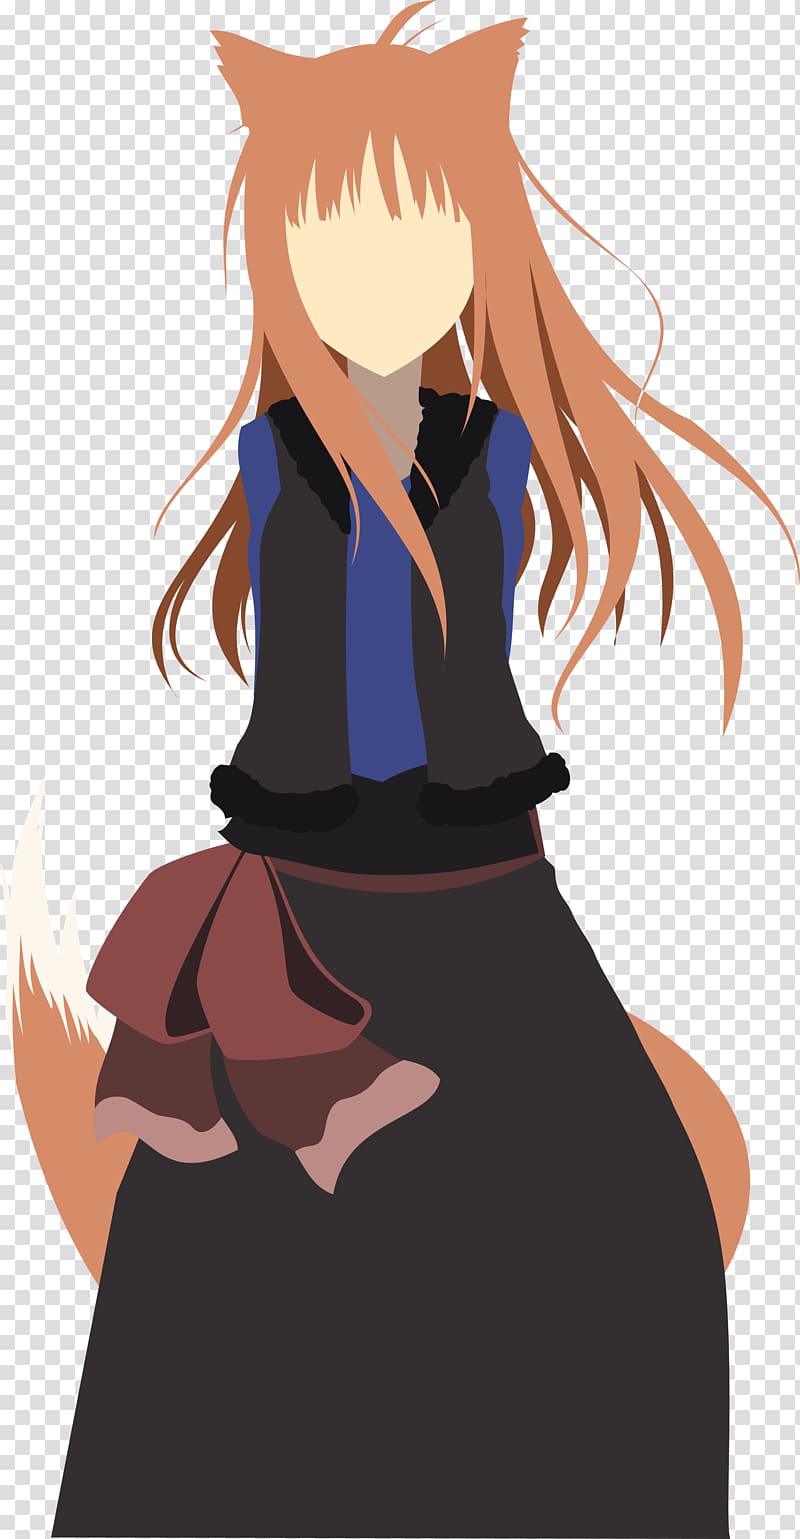 Spice and Wolf Anime Gray wolf Art, simplify transparent background PNG clipart